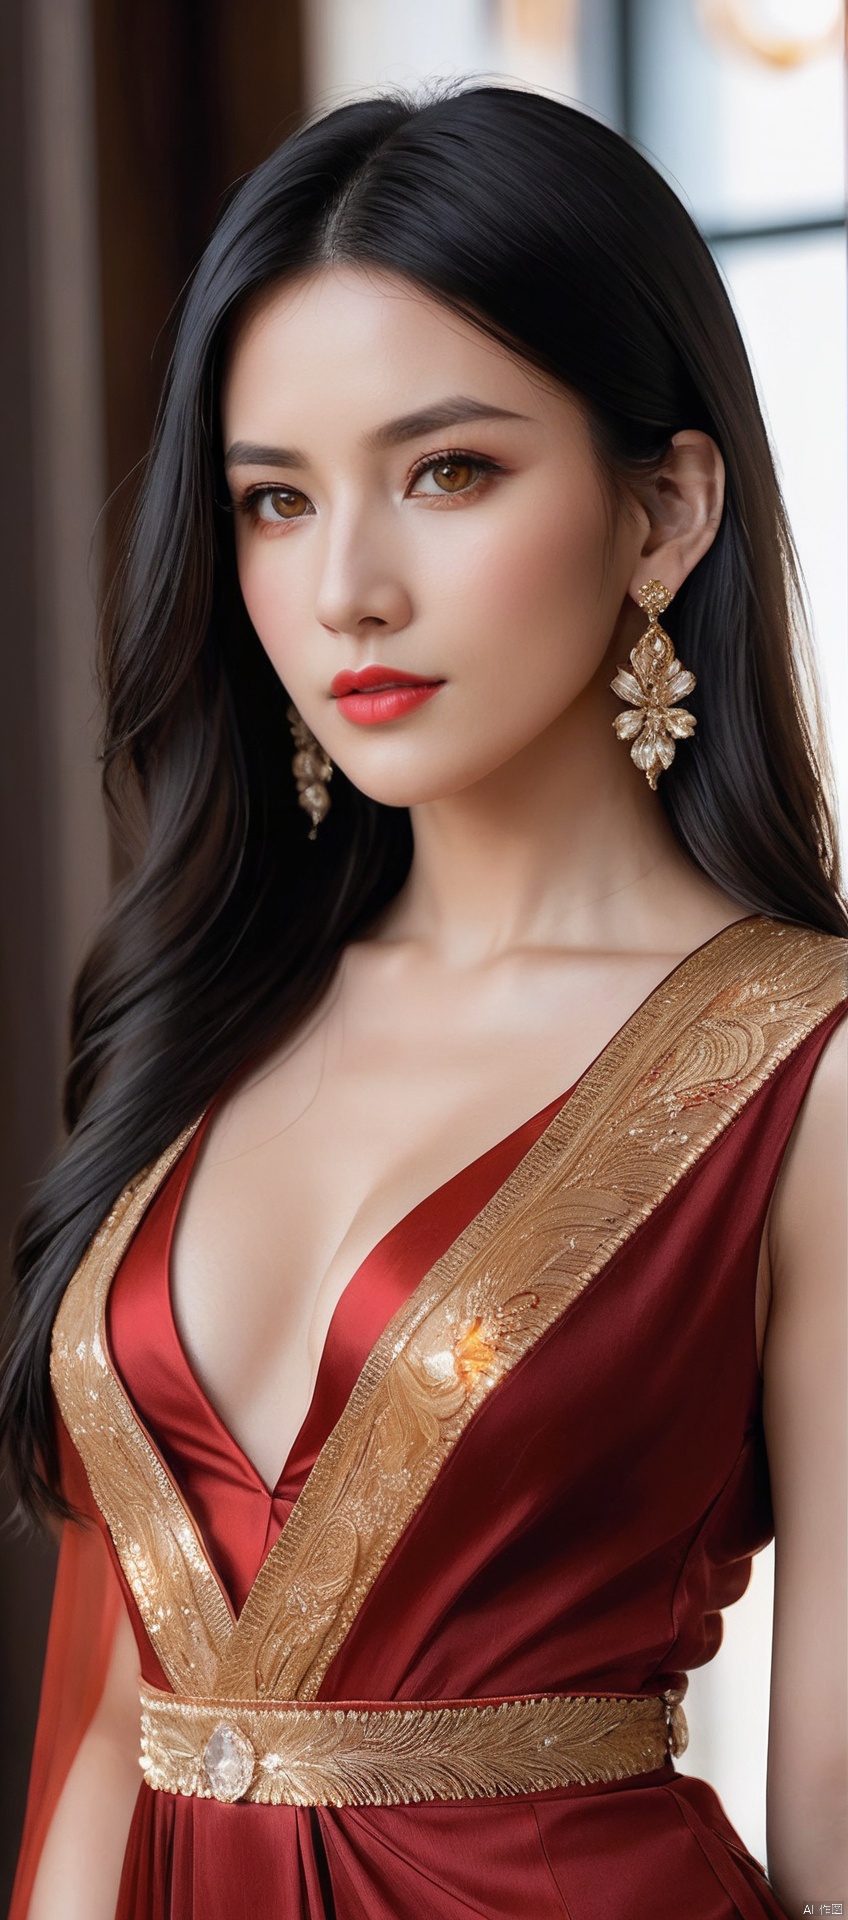 8k,RAW, Fujifilm XT3, masterpiece, best quality, photorealistic,1girl,solo, diamond stud earrings, long straight black hair, hazel eyes, serious expression, slender figure,(upper body shot), (upper body view),dodger red and gold see through dress,red and gold transparent shawl,beautiful symmetrical face,in the style of elegant clothing,high heels,g002,g001,